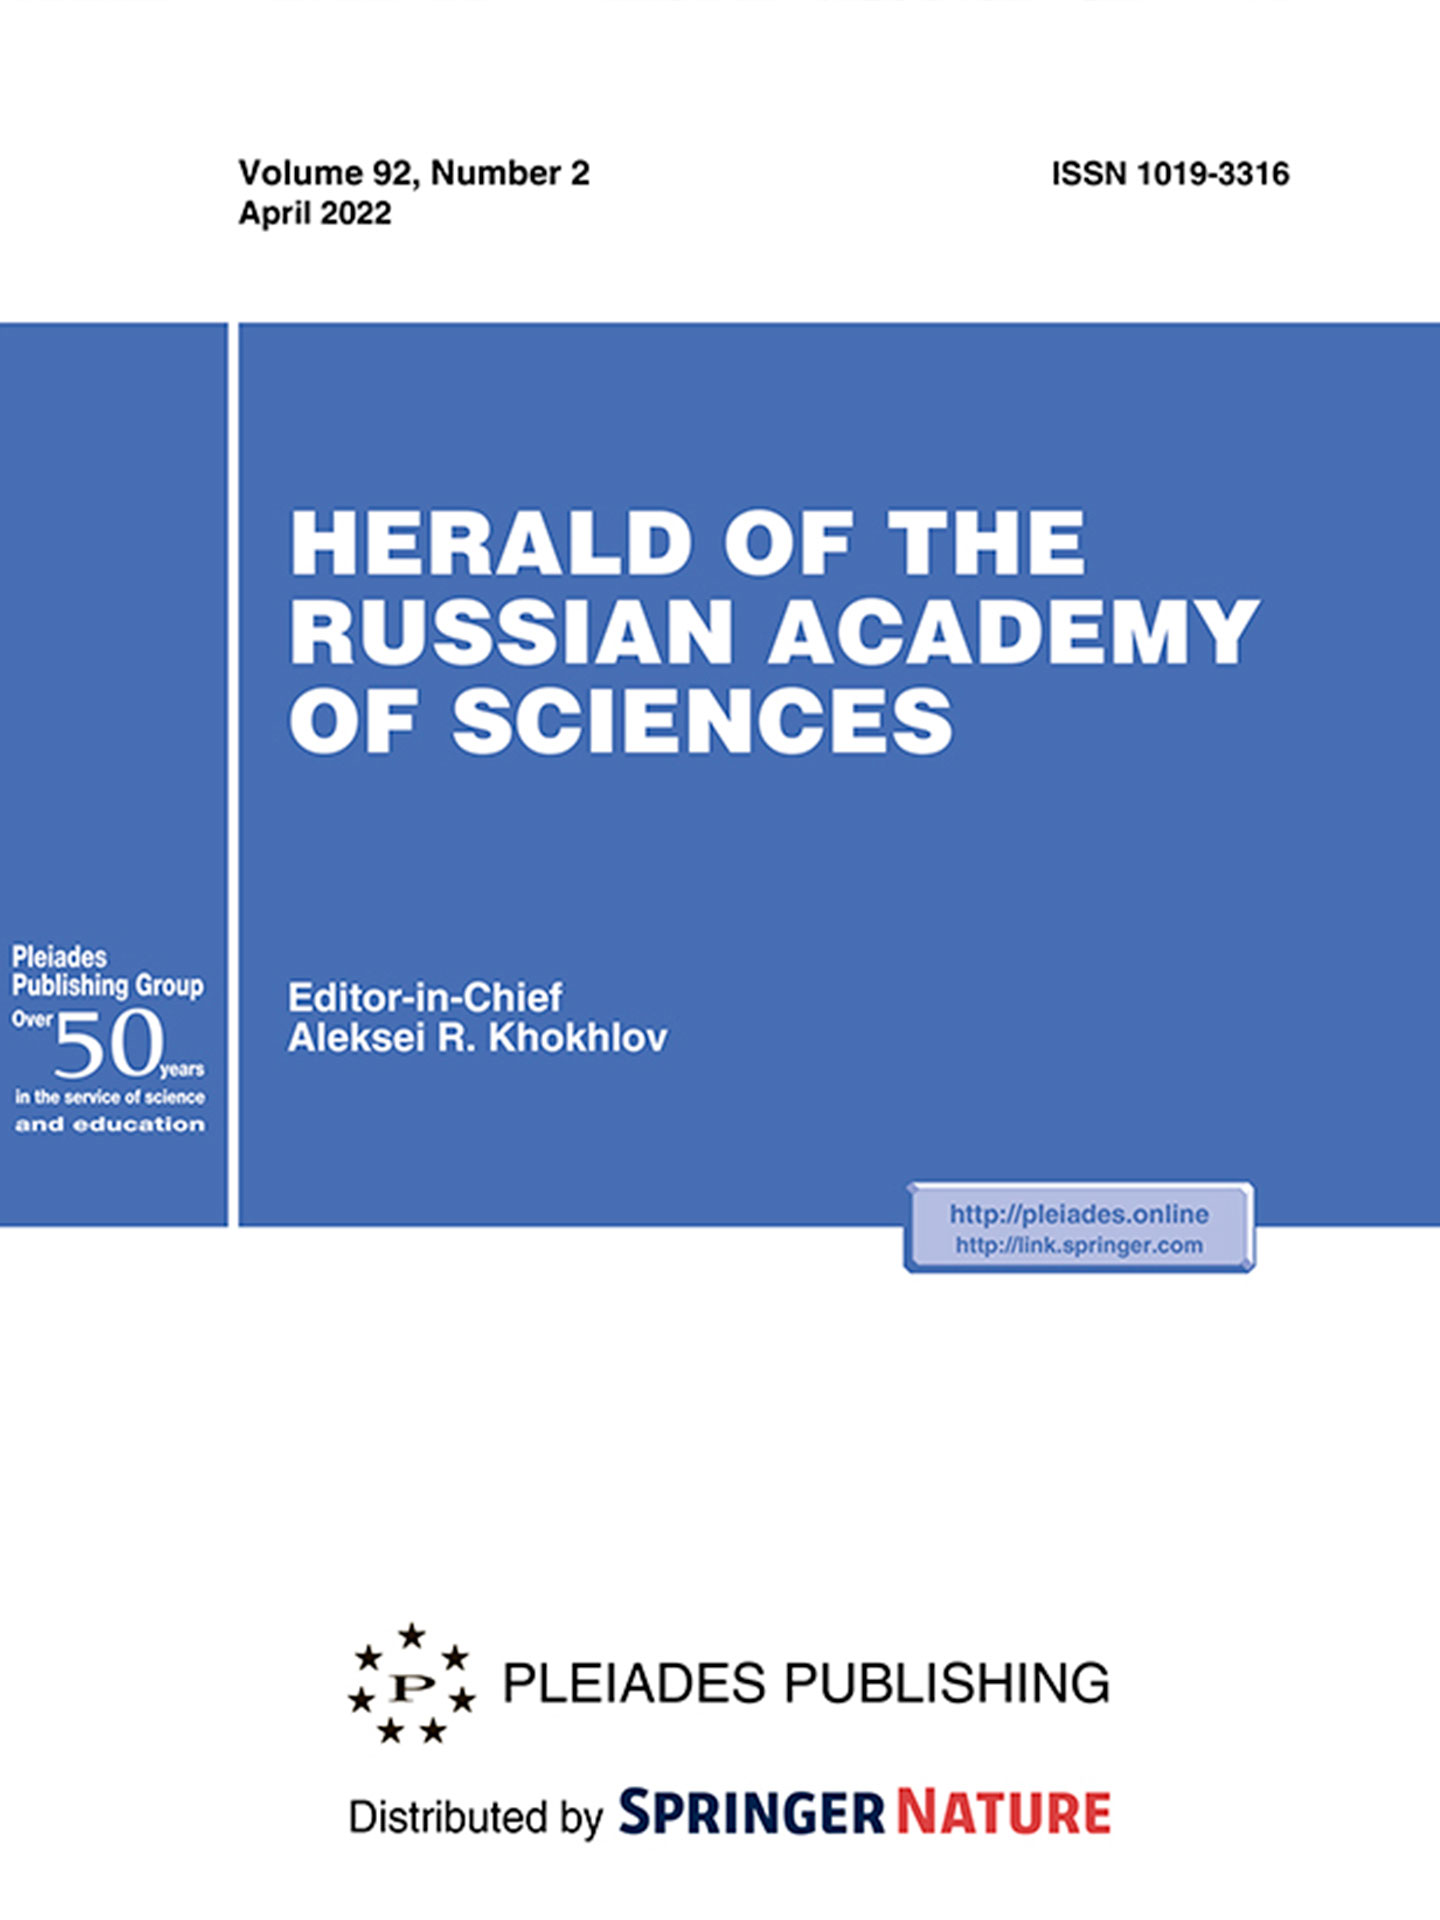 Журнал Herald of the Russian Academy of Sciences